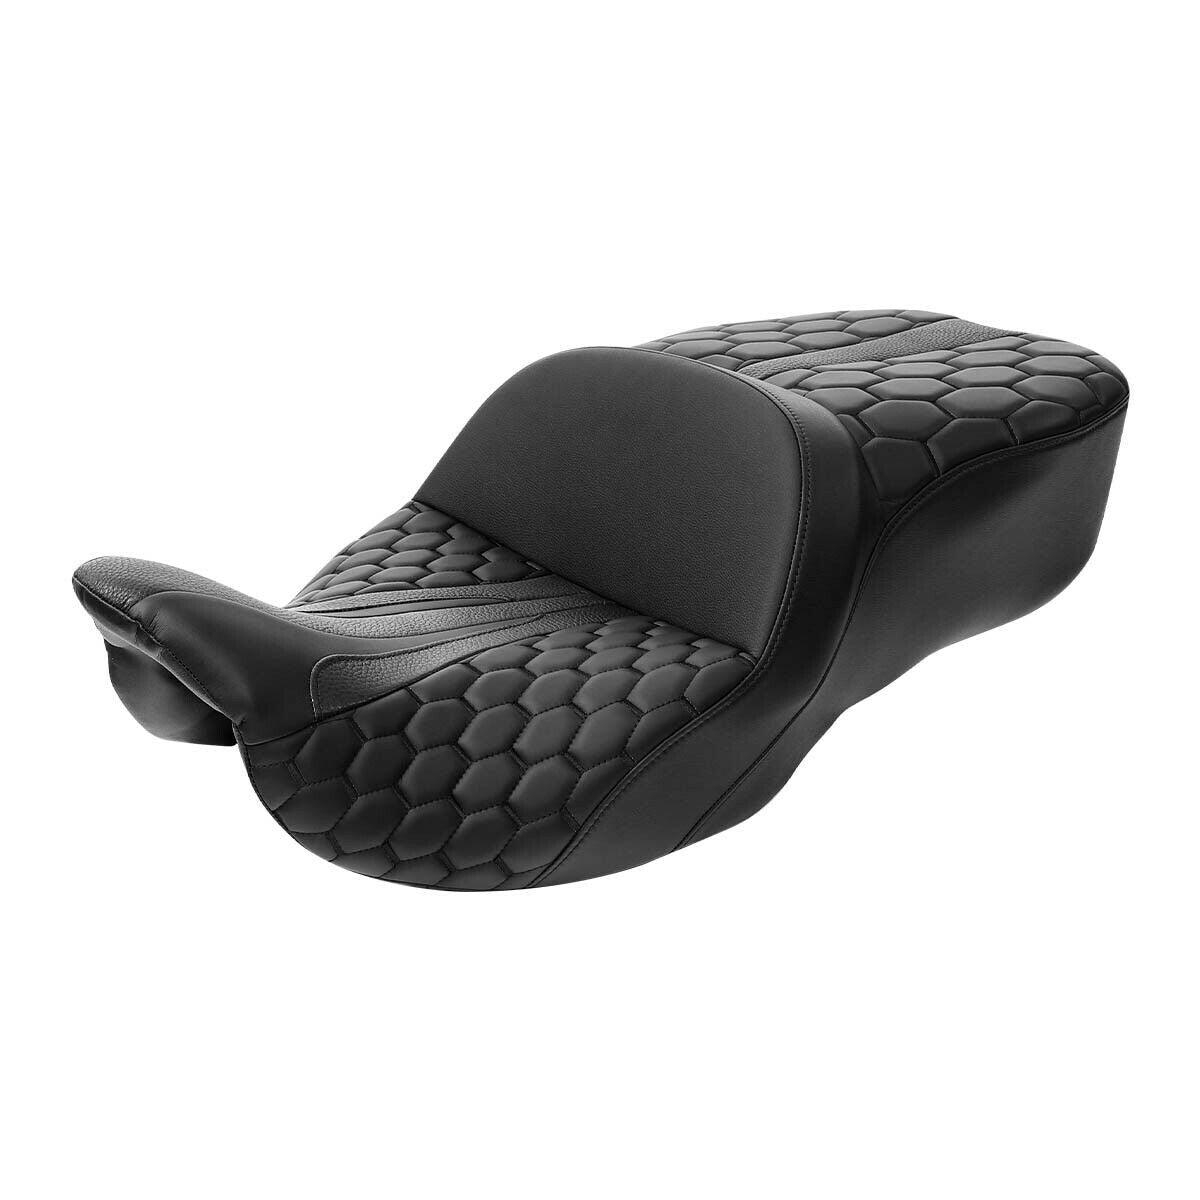 Driver Passenger Seat Fit For Harley Touring Electra Road Glide Tri Glide 09-21 - Moto Life Products